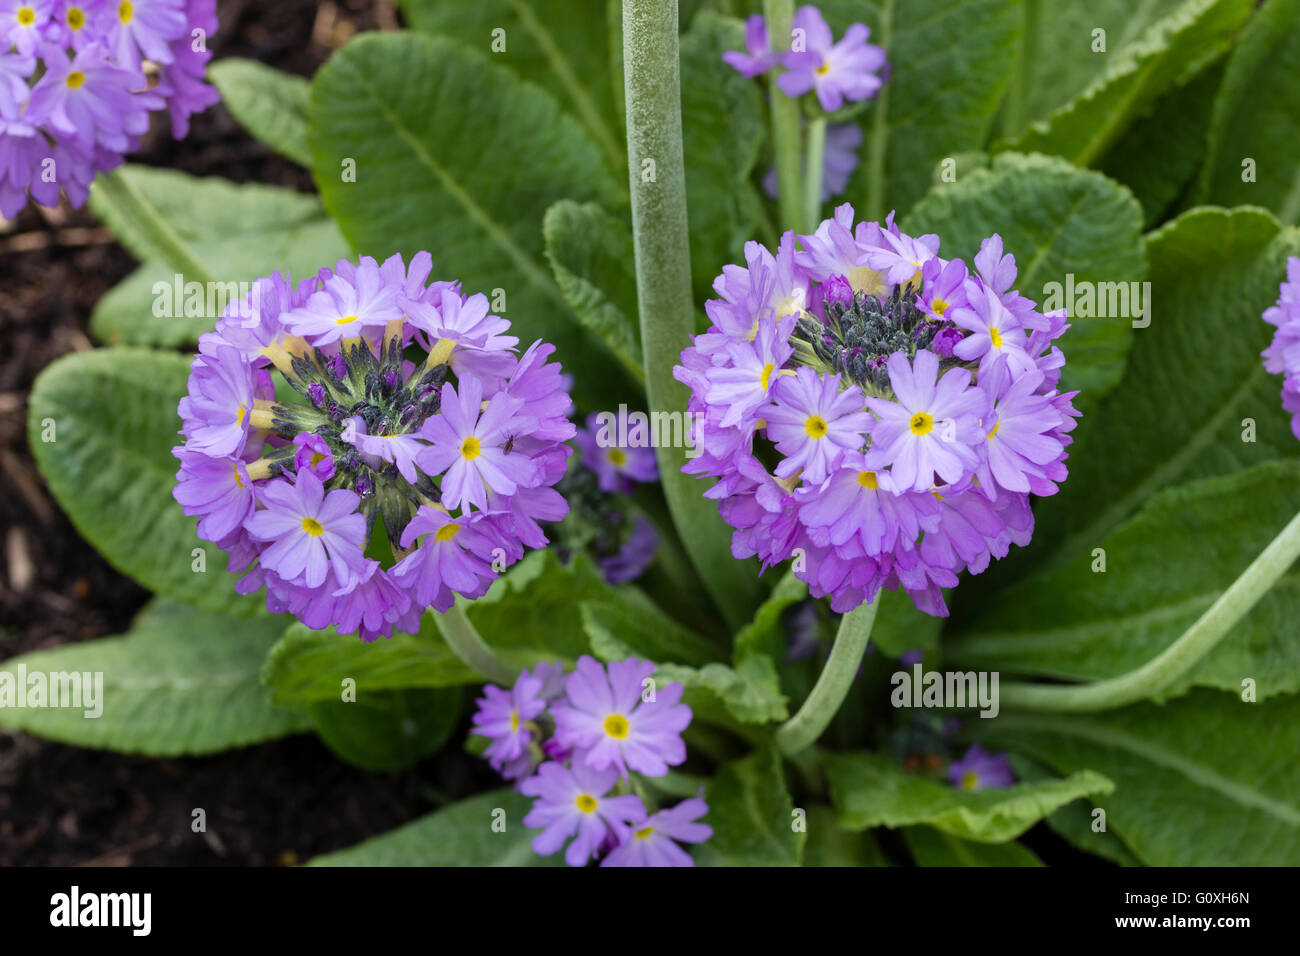 Mauve drumstick heads of the spring flowering hardy perennial Primula denticulata Stock Photo